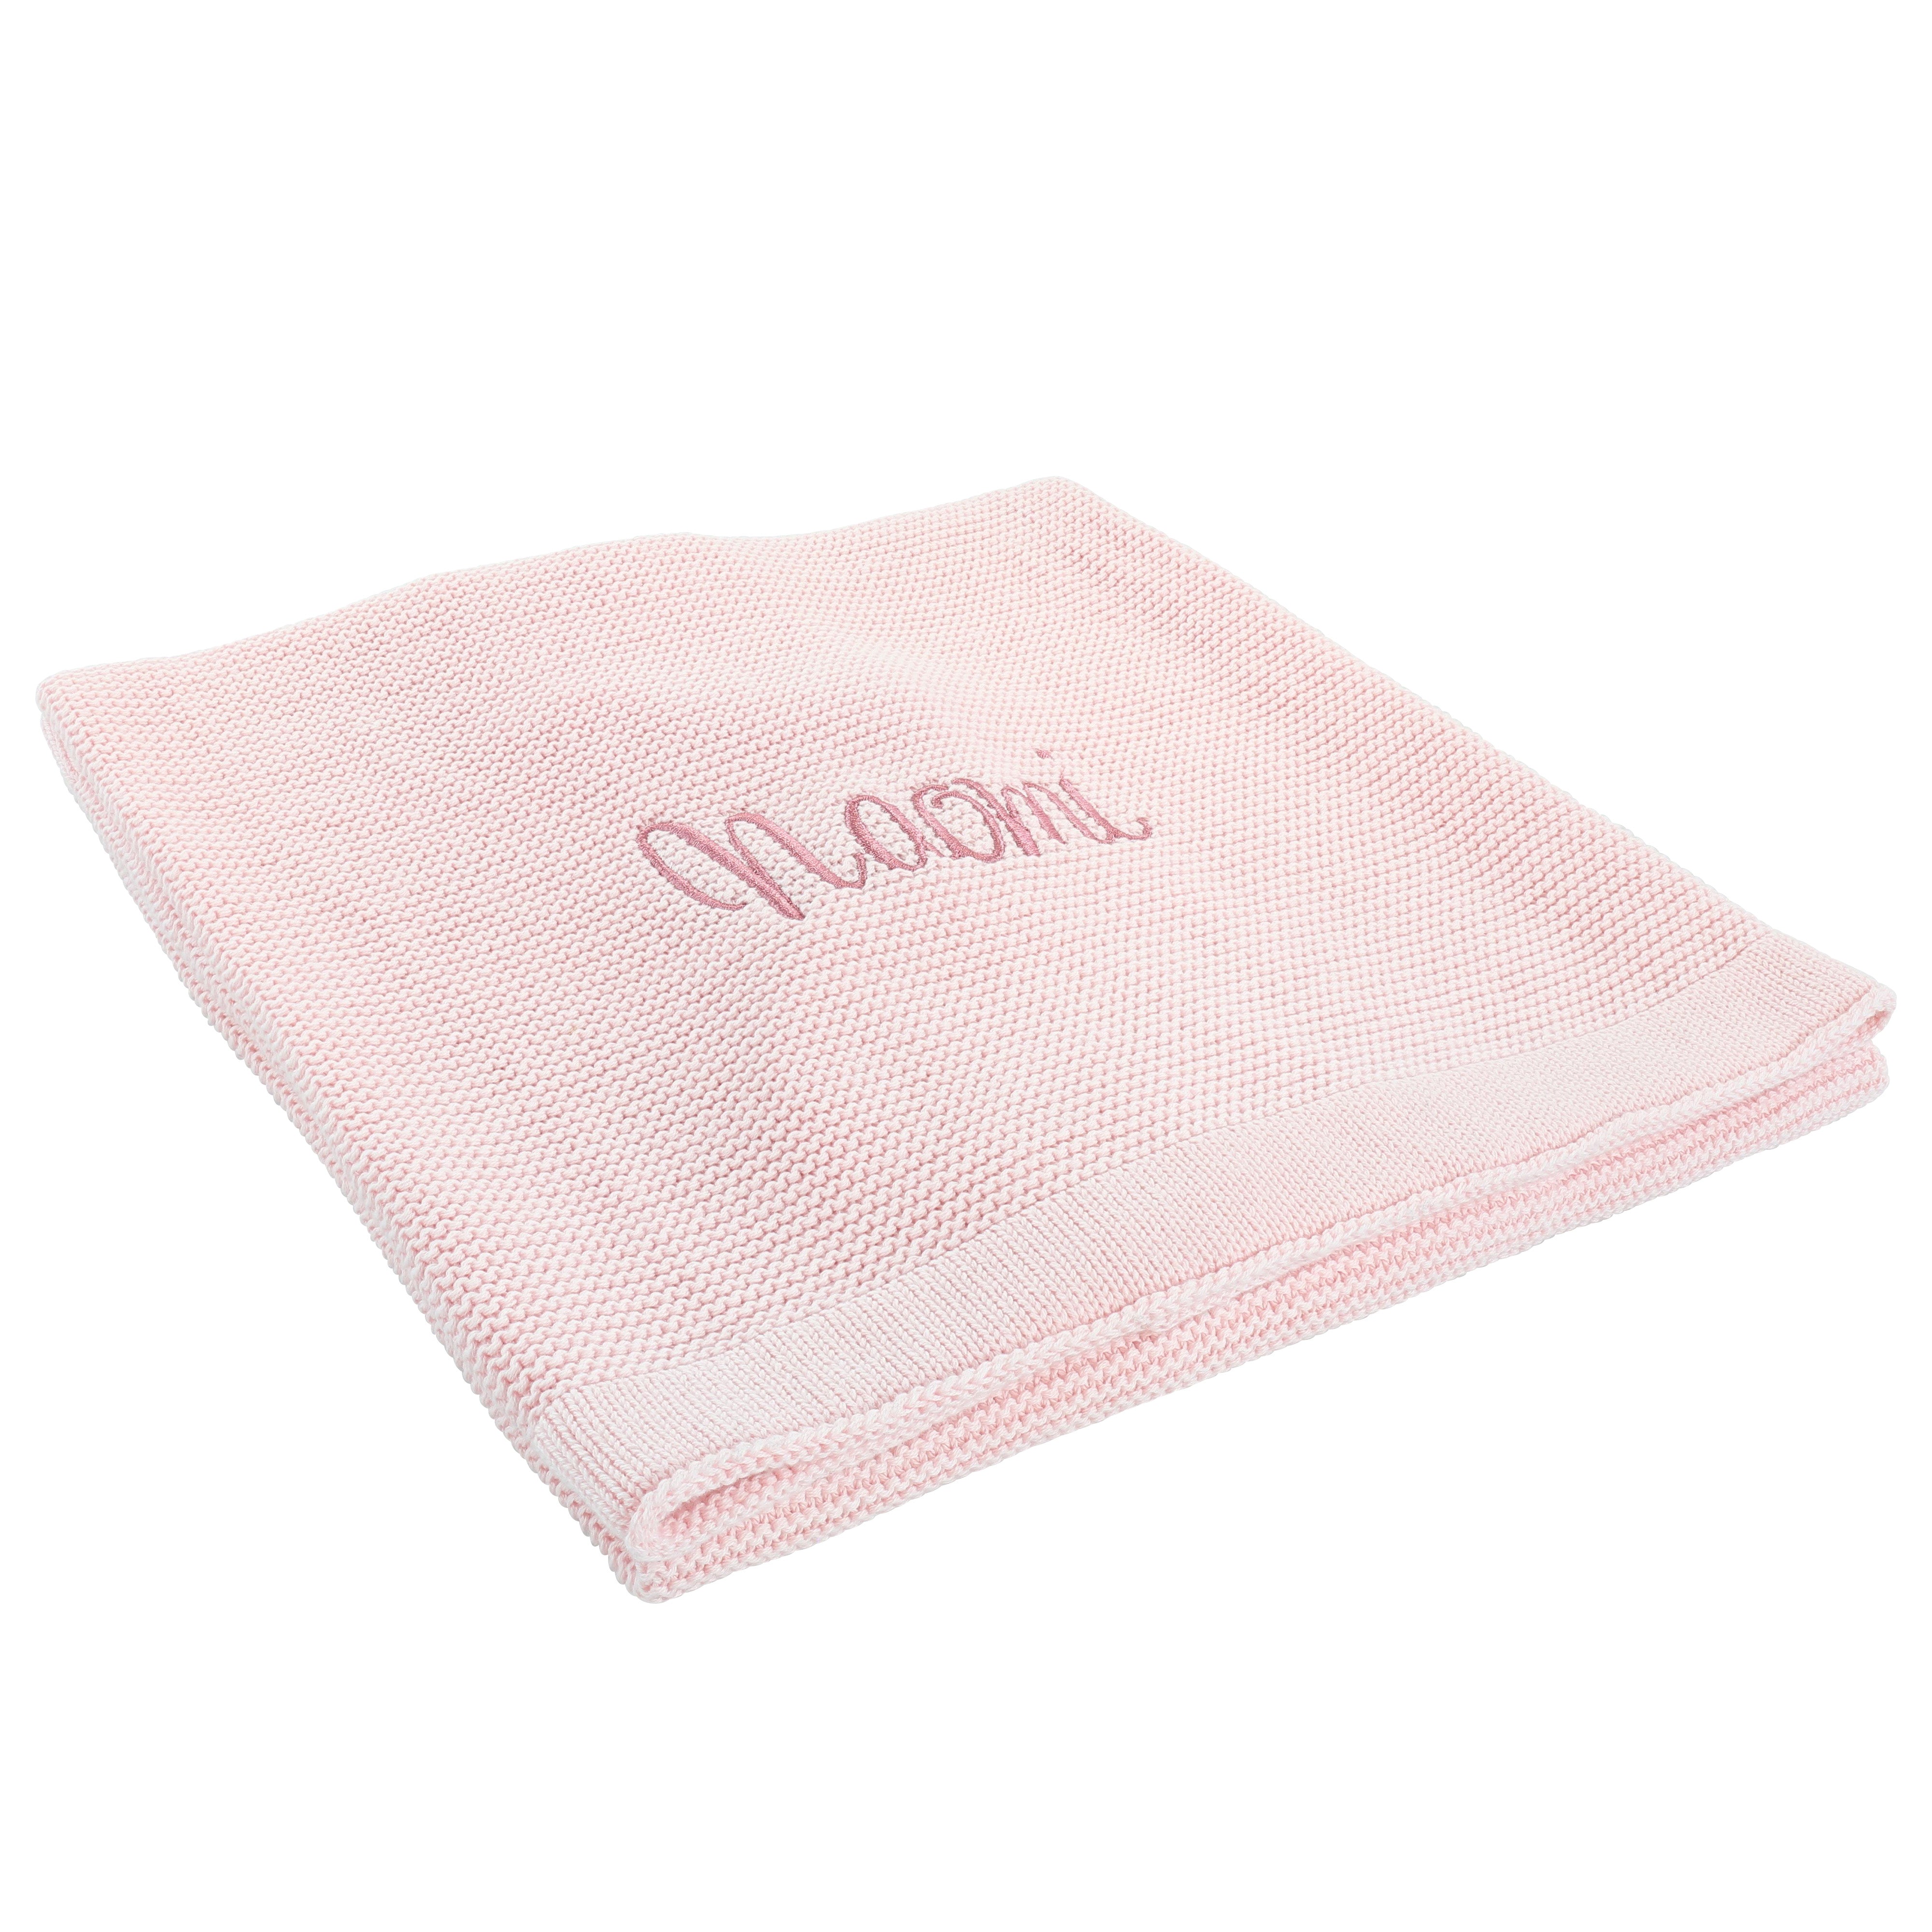 Personalized Baby Blanket, Cotton Knit Blanket Pink